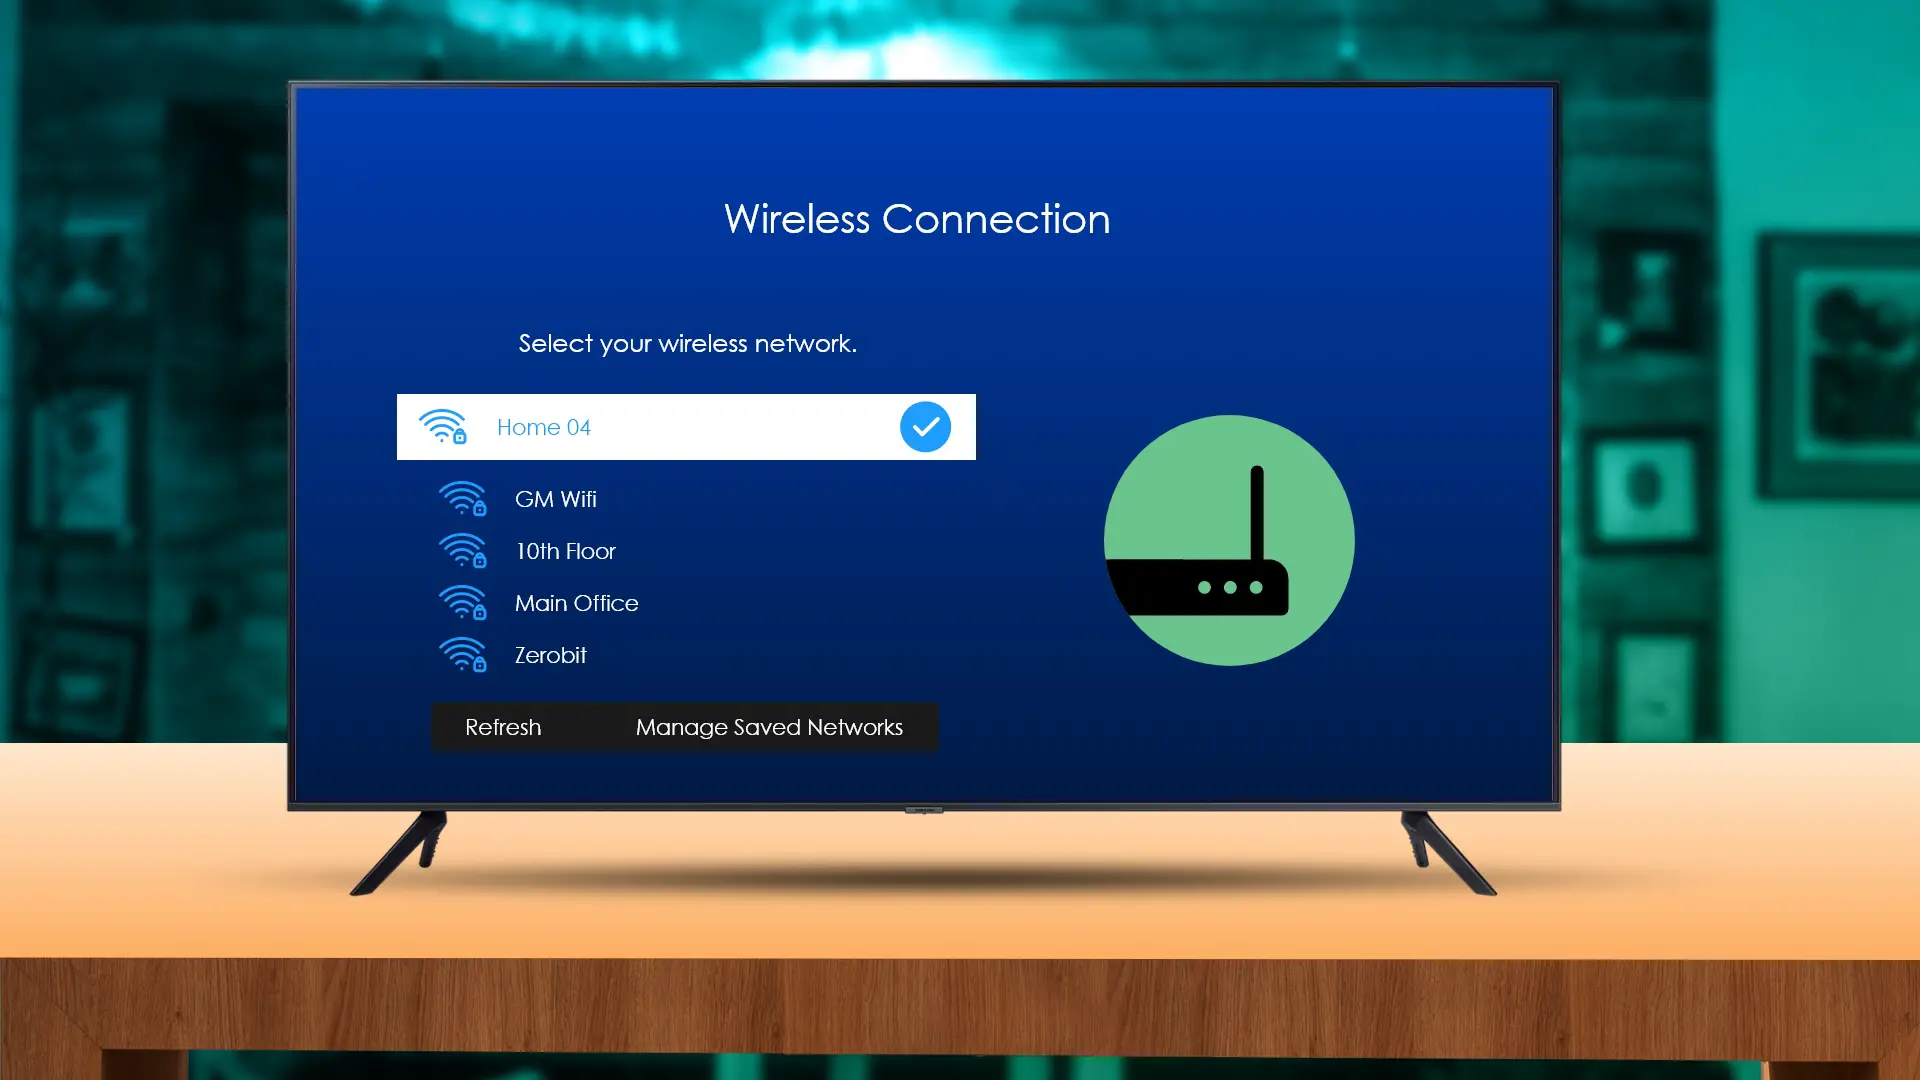 Steps for connecting your Samsung smart TV to WiFi